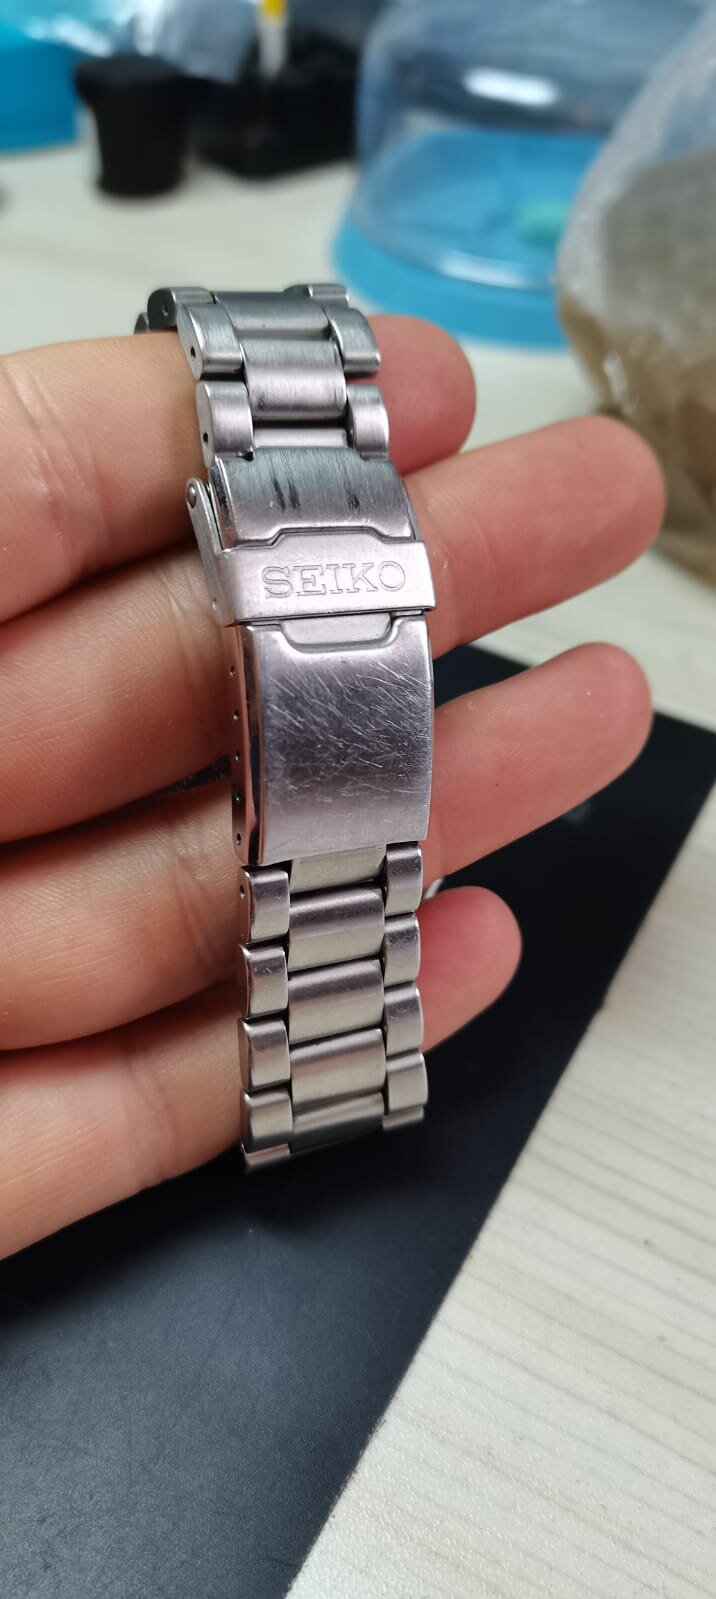 SEIKO watch repair 7T32-7C20 672566 in for battery, resealing and clean  from Bathgate, Edinburgh. | Watches Fixed | Watch Repairs | Latest Watch  News | Watch Hub